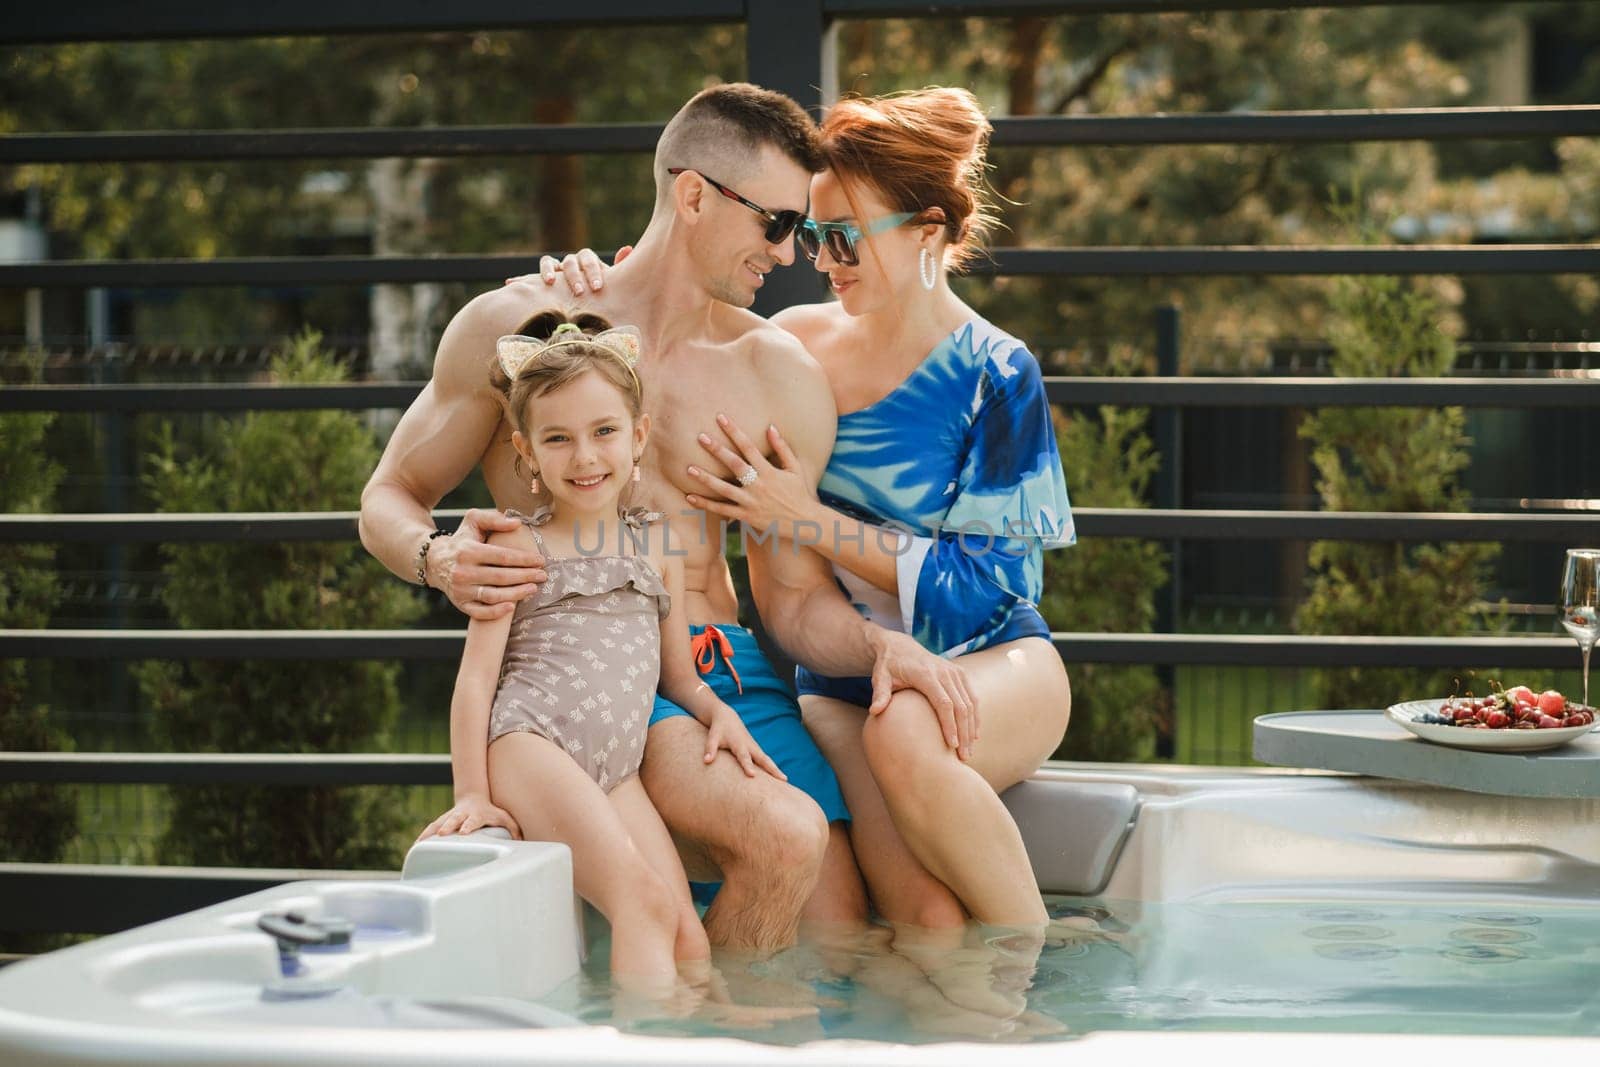 In summer, the family rests in the outdoor hot tub by Lobachad